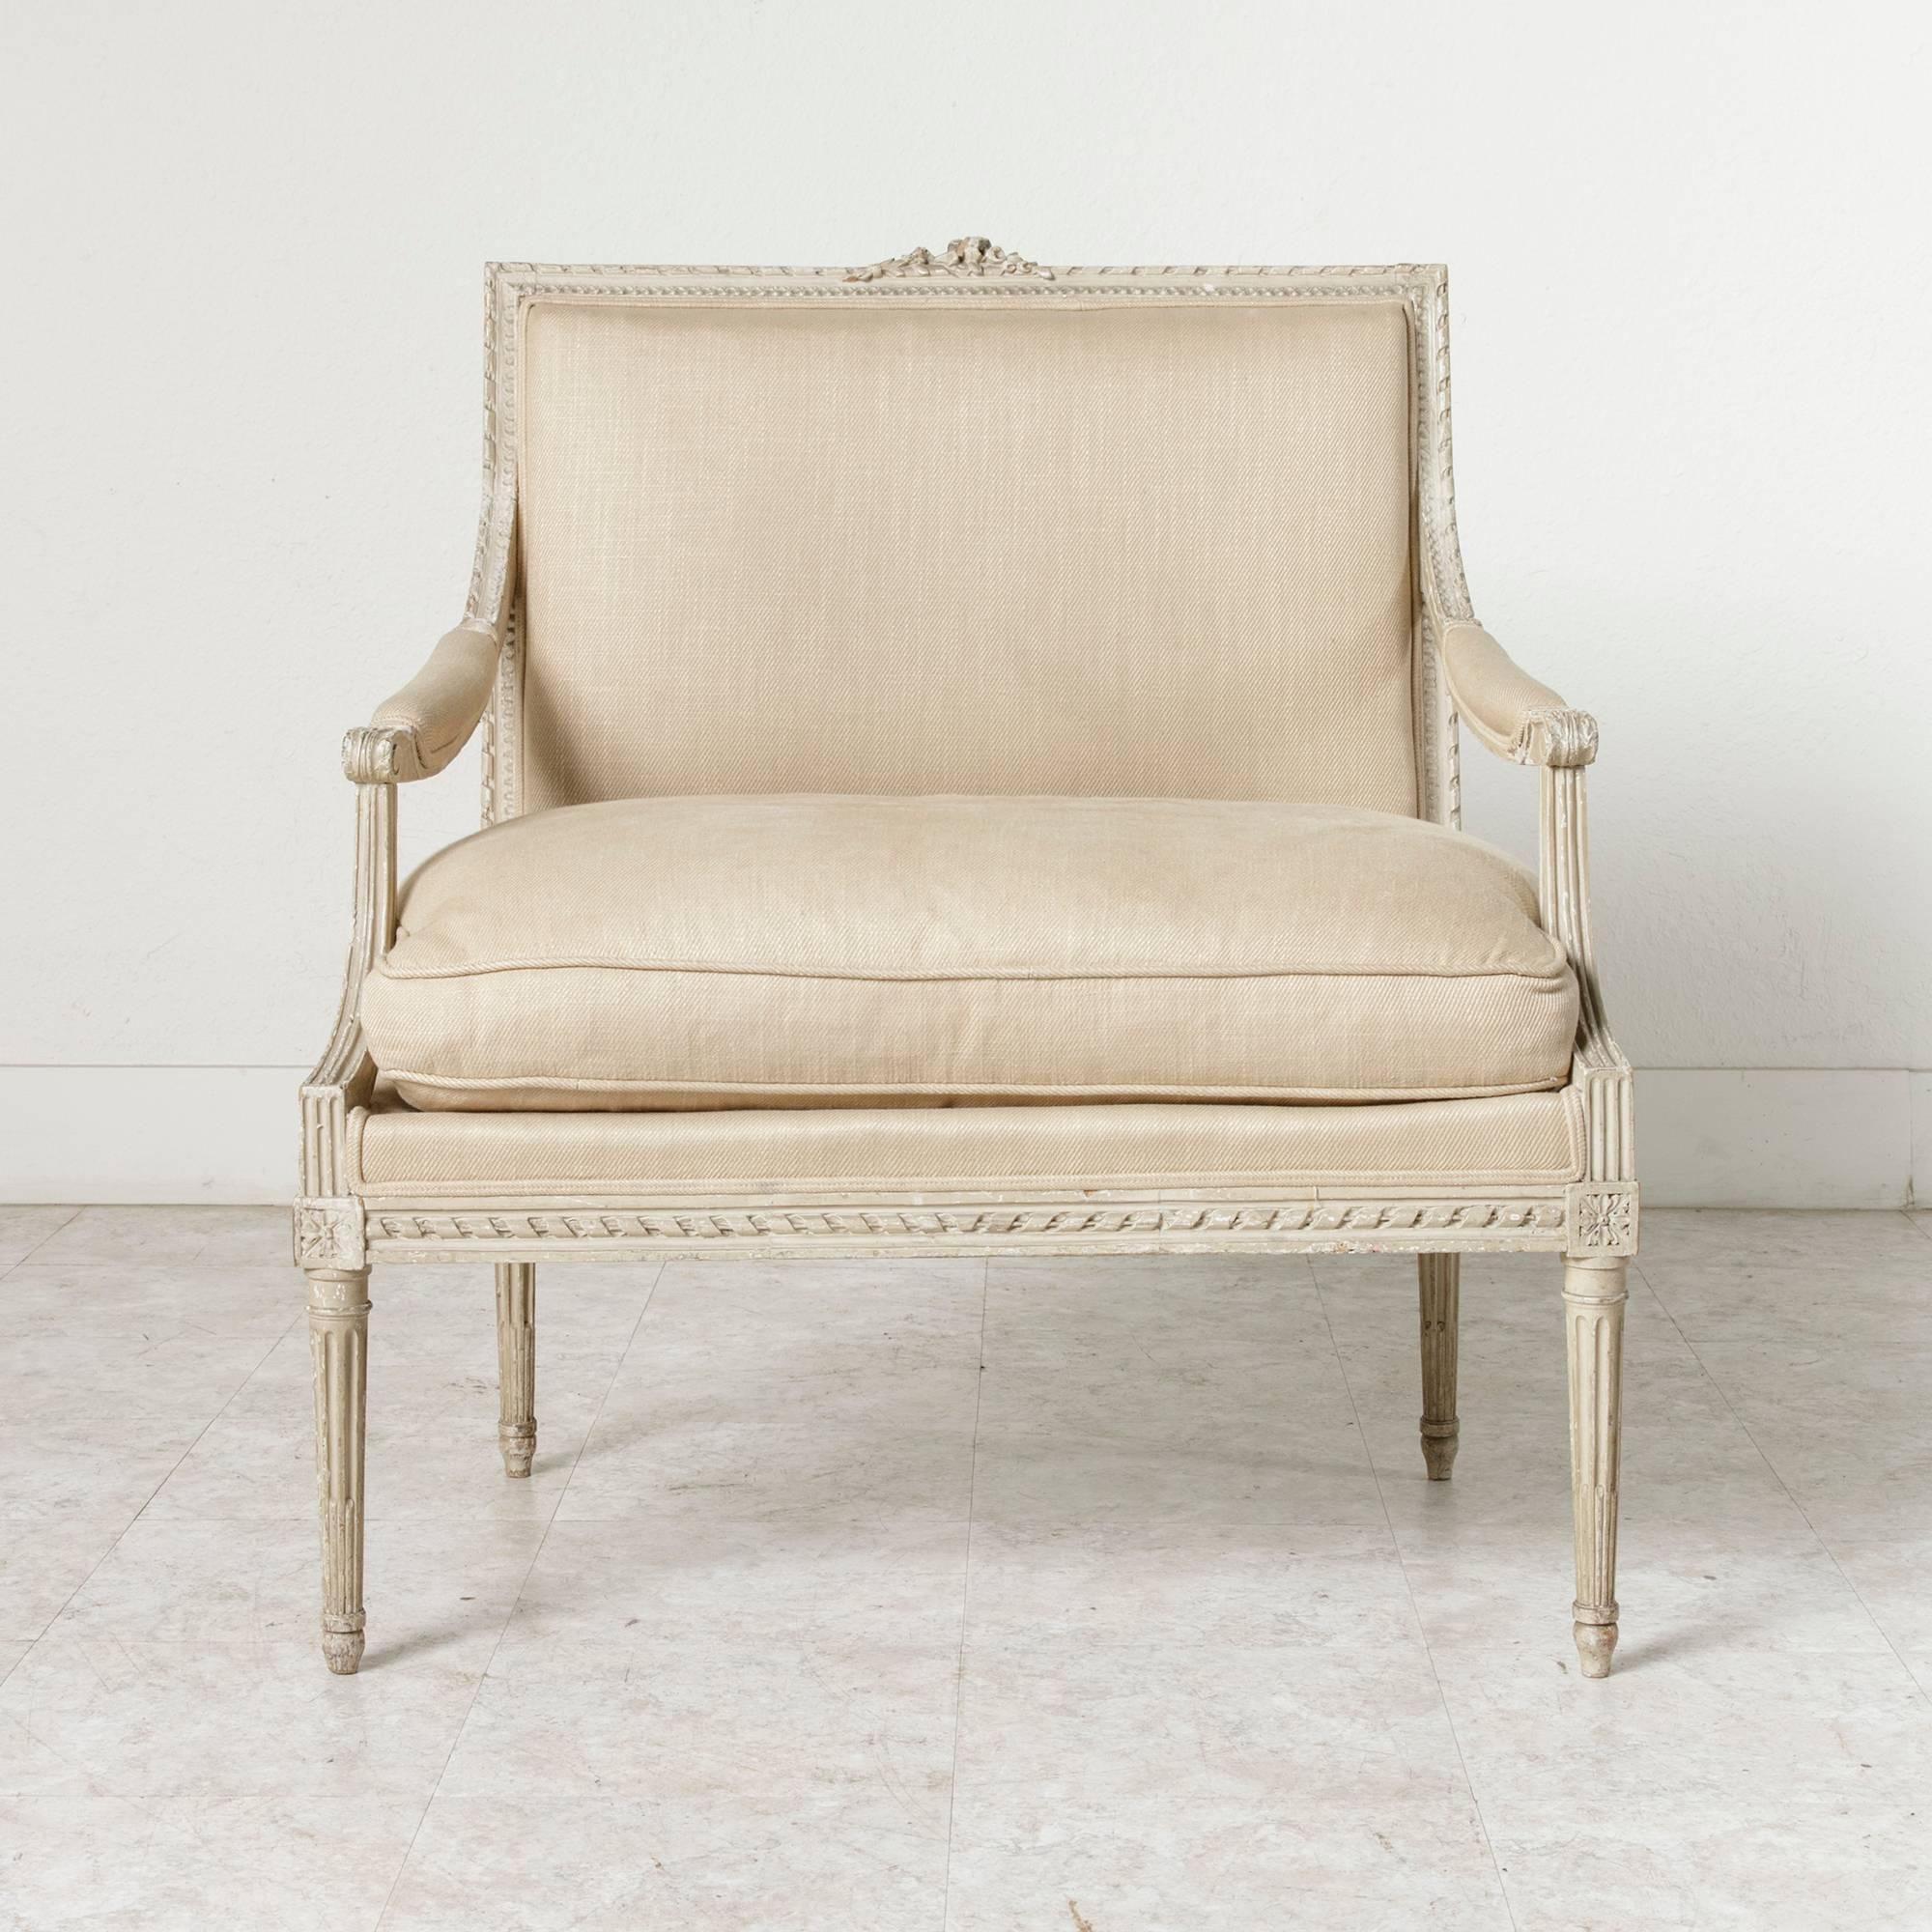 With a unique width of 33 inches, this Louis XVI period painted armchair, called a fauteuil a la reine (armchair for a queen), was originally meant to accommodate the large dresses worn by noble women of the period. Its delicate hand carvings